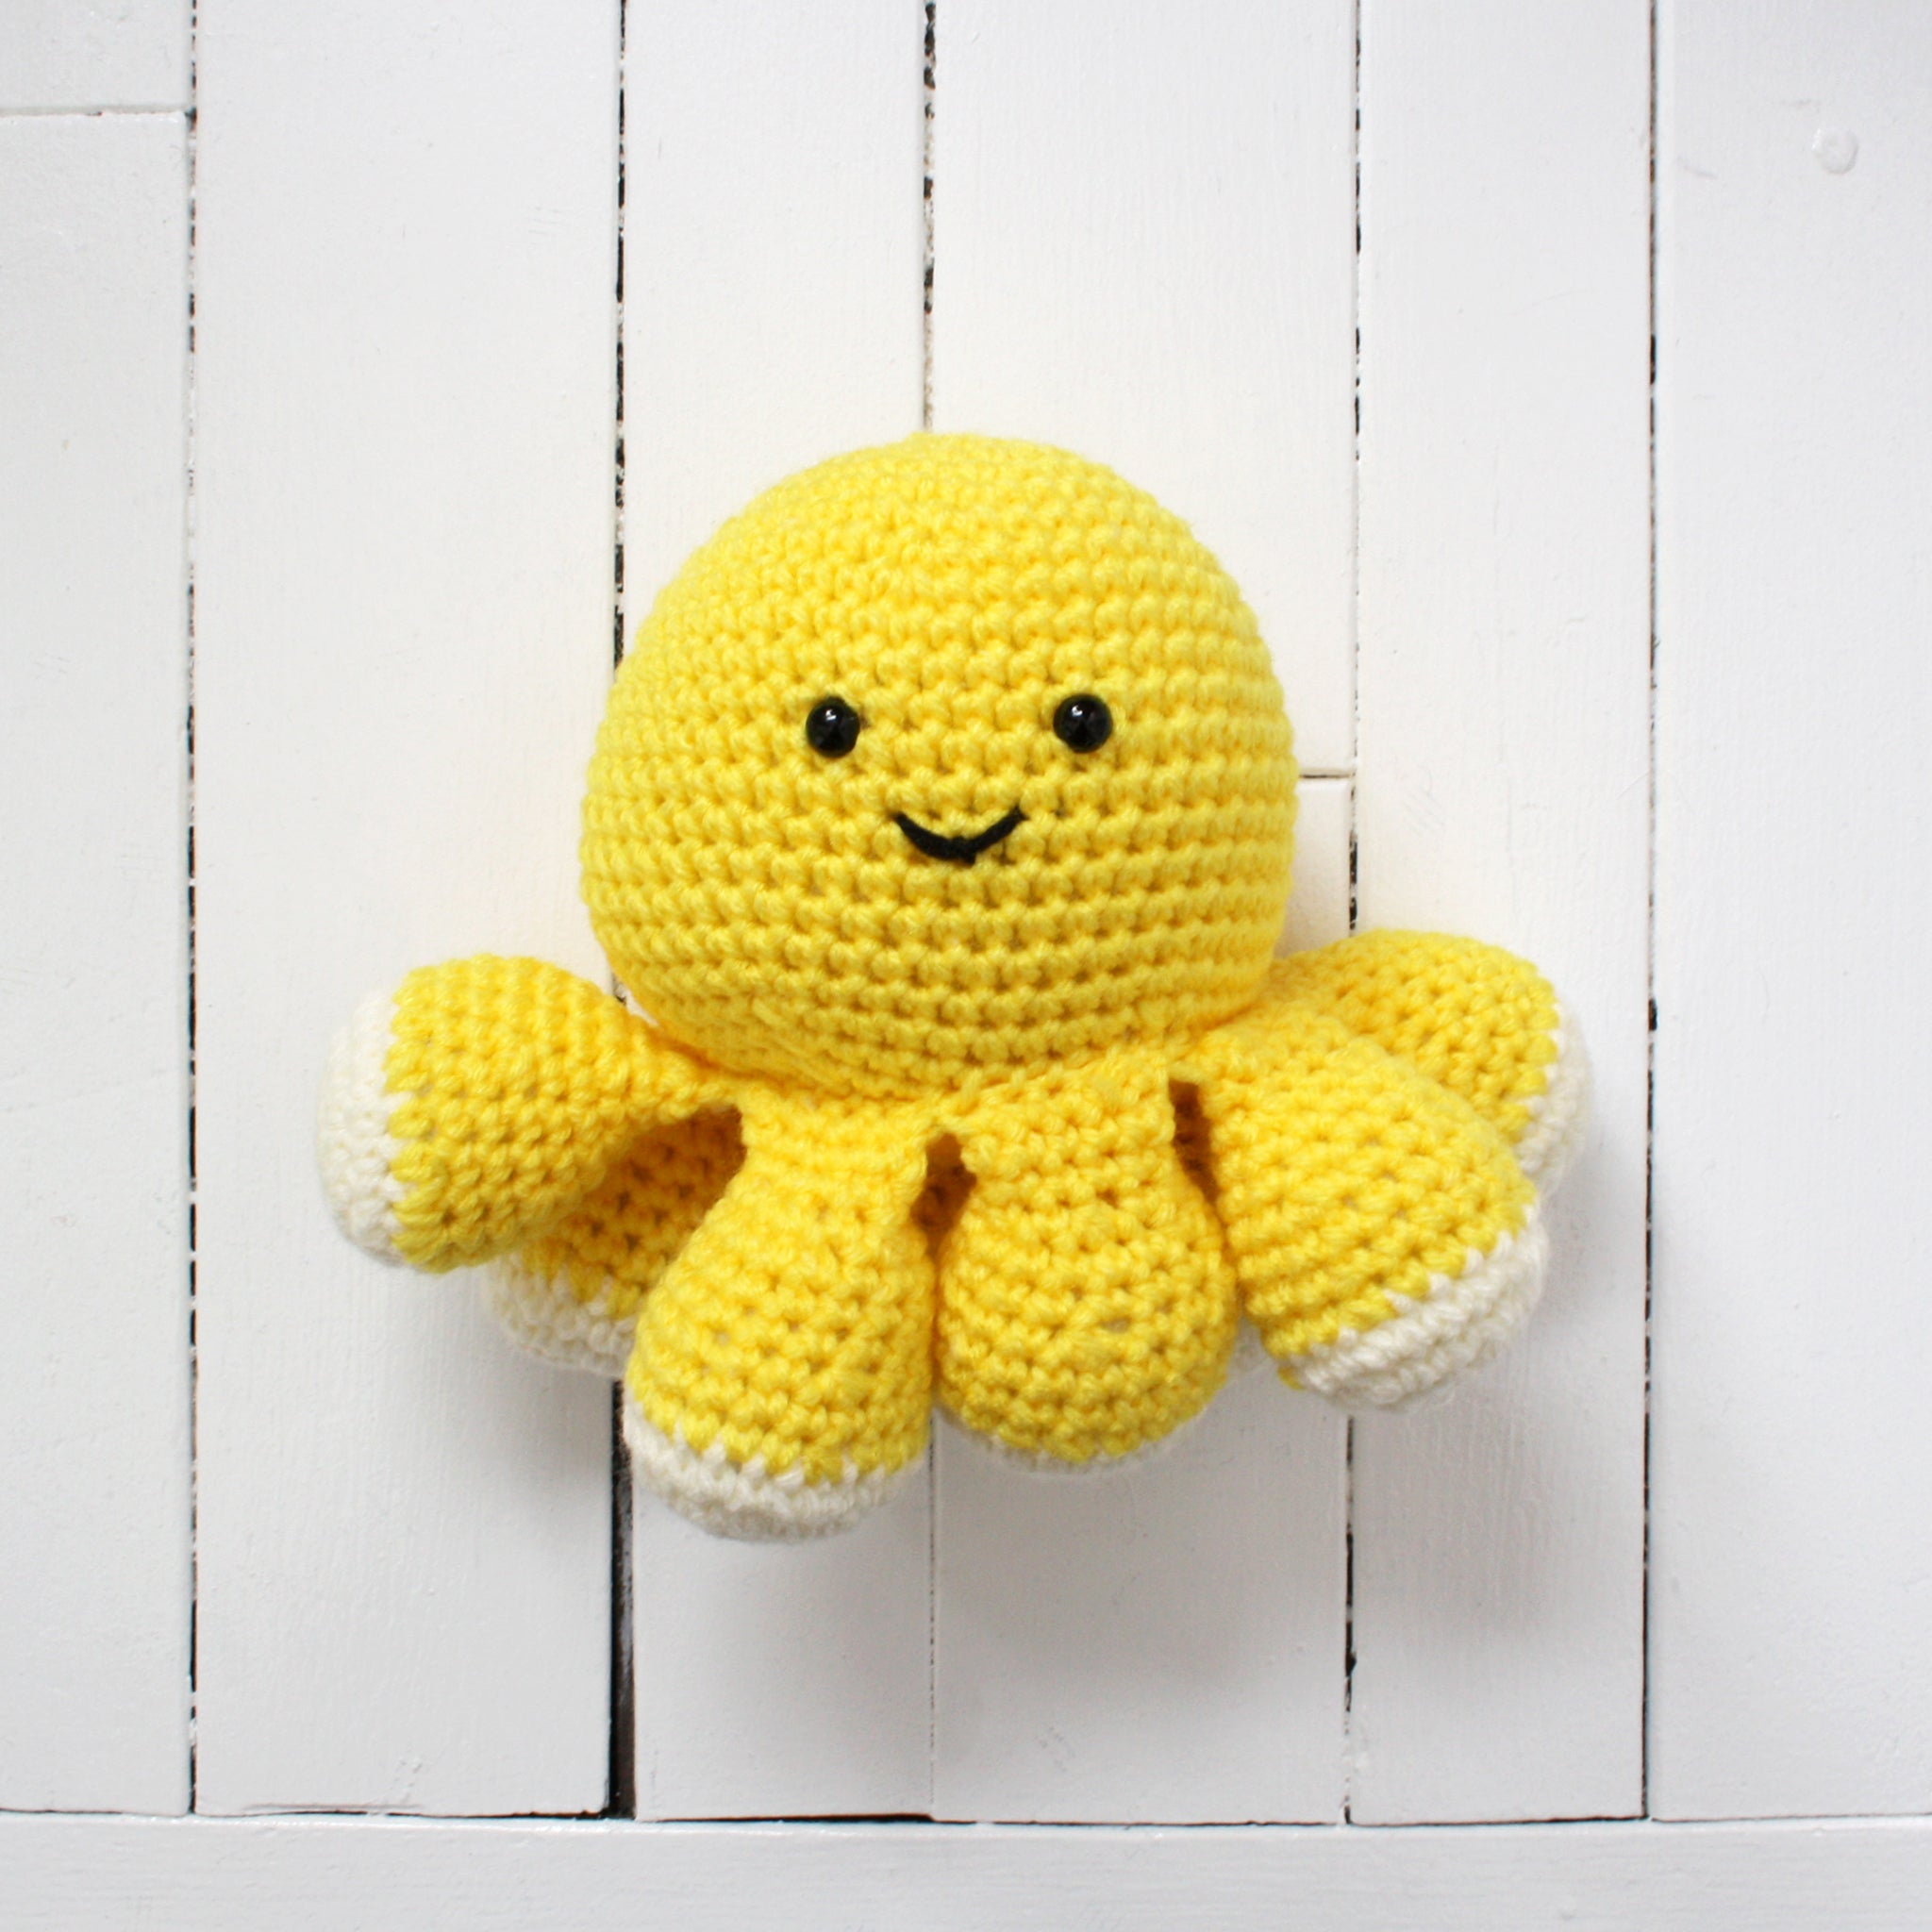 Yellow crocheted octopus plush toy made in Newfoundland.